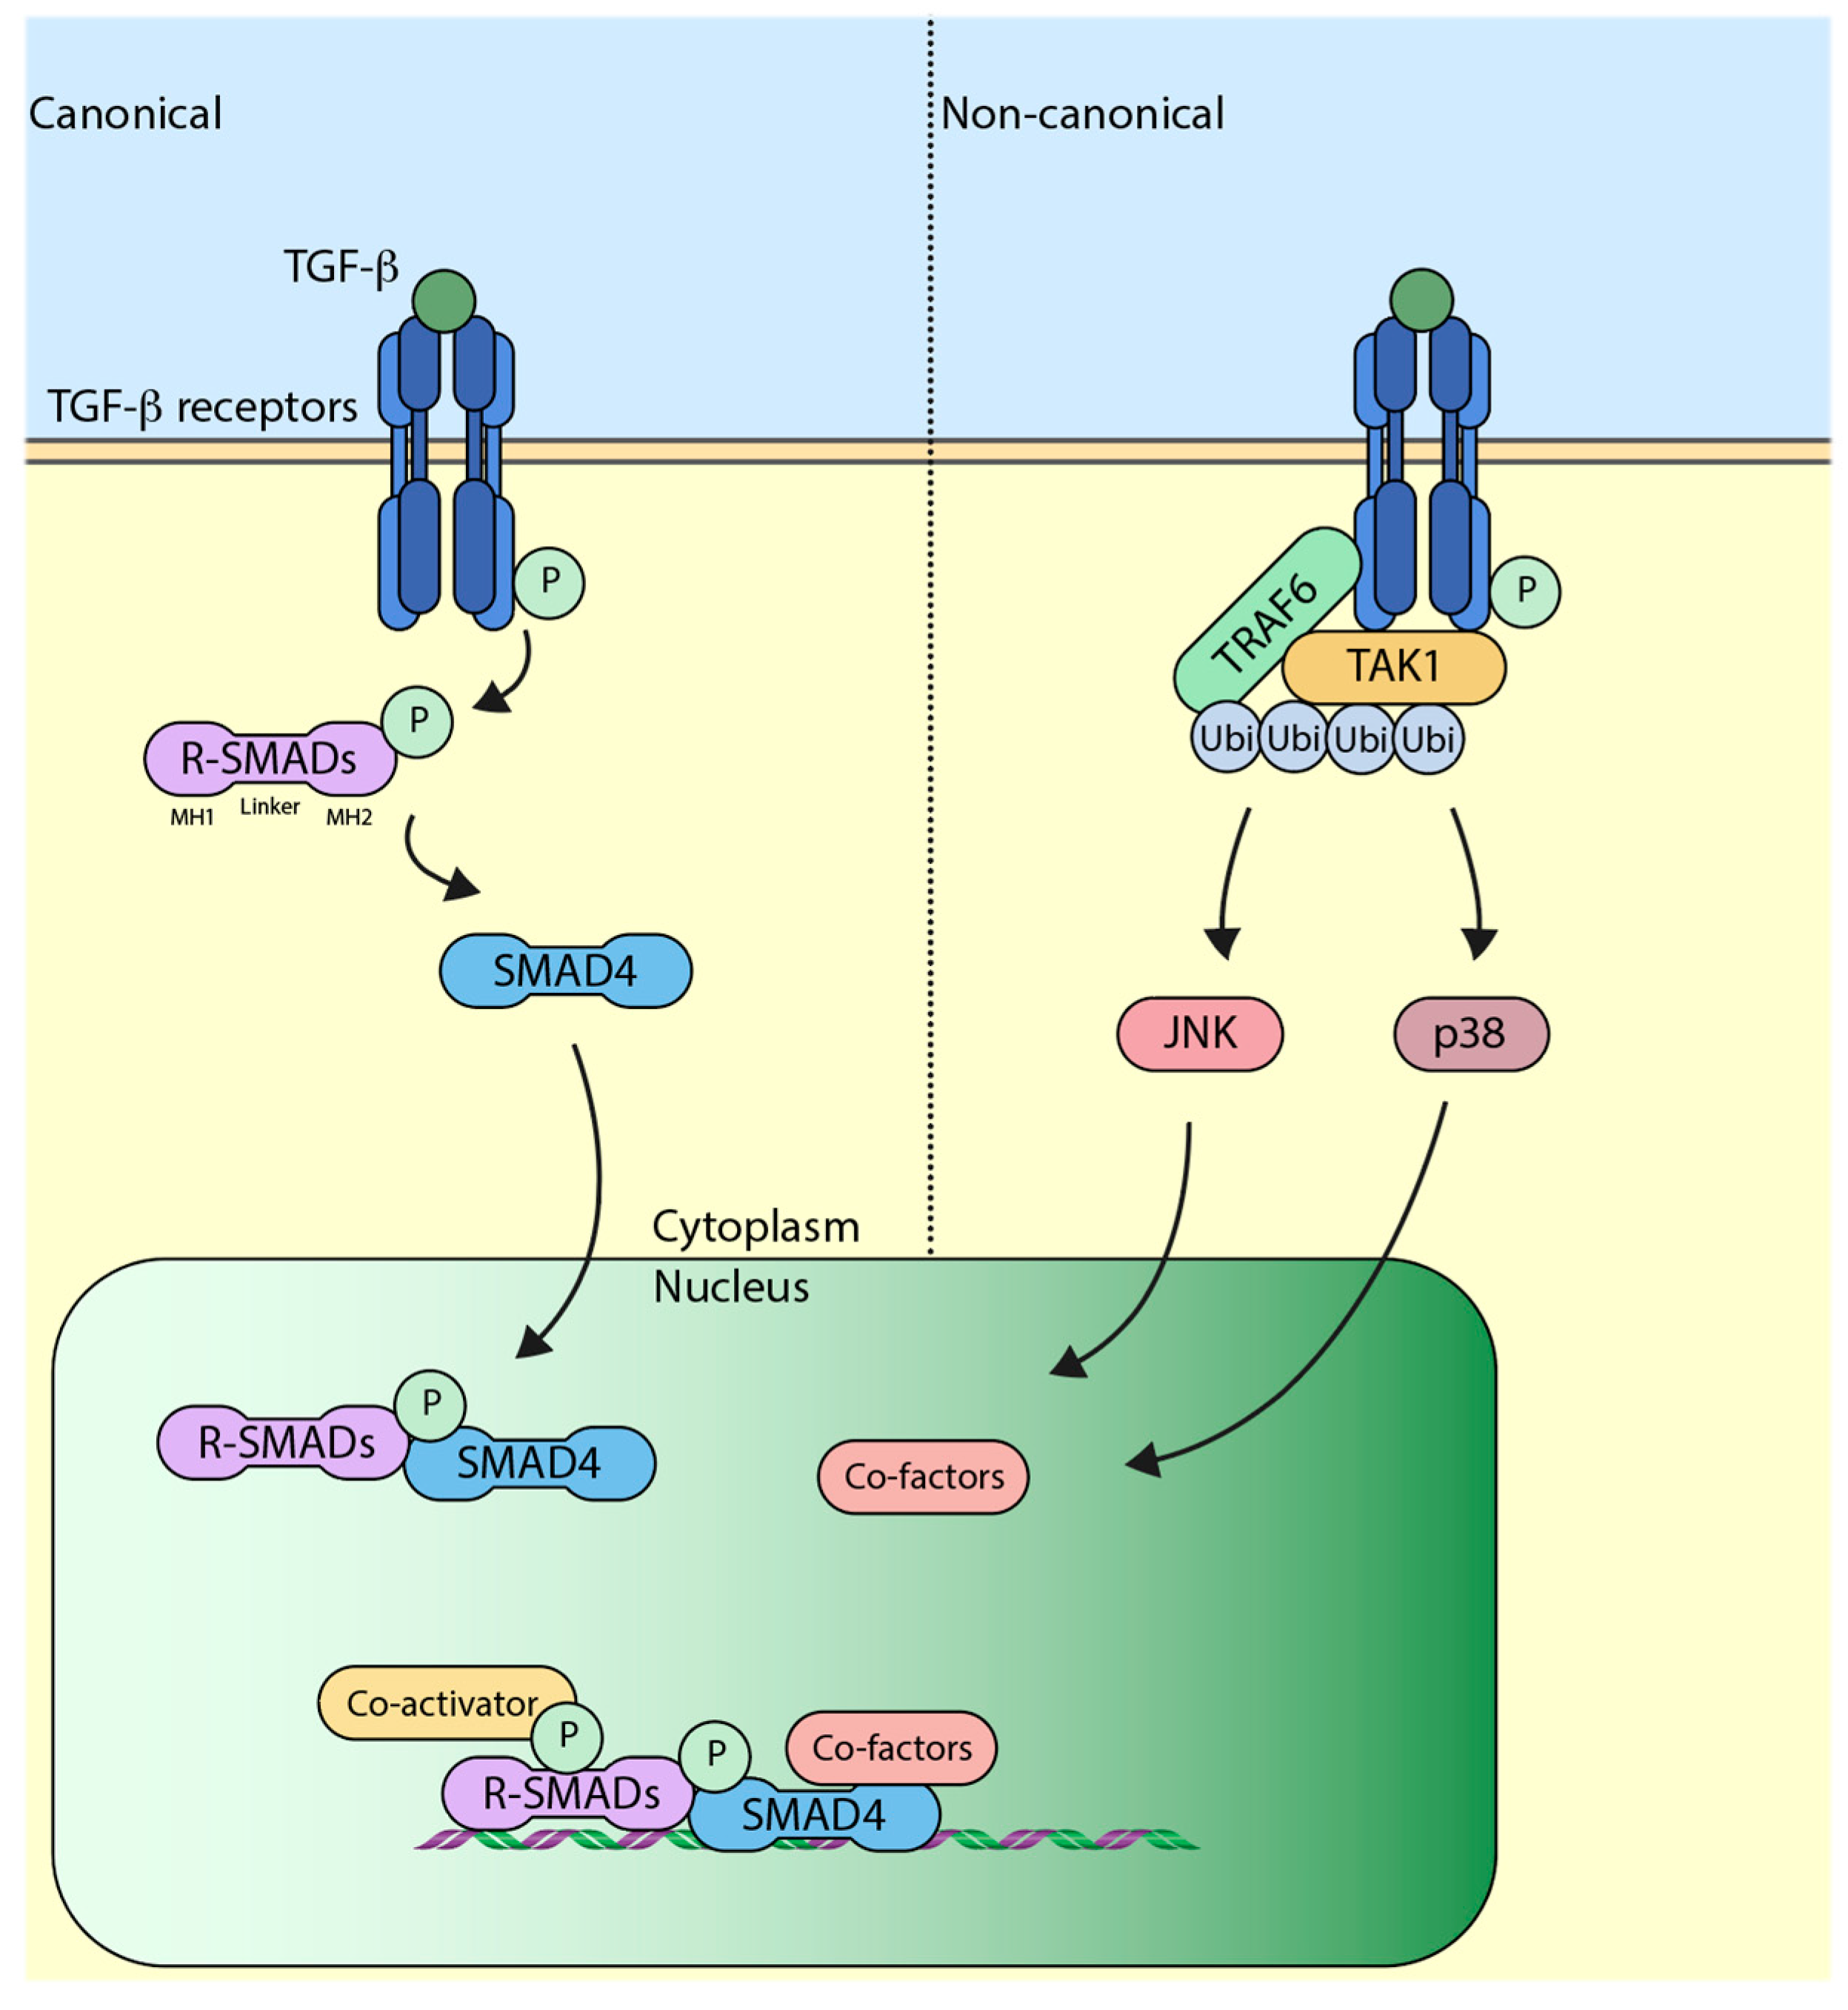 Regulation of Ubiquitin Enzymes in the TGF-β Pathway